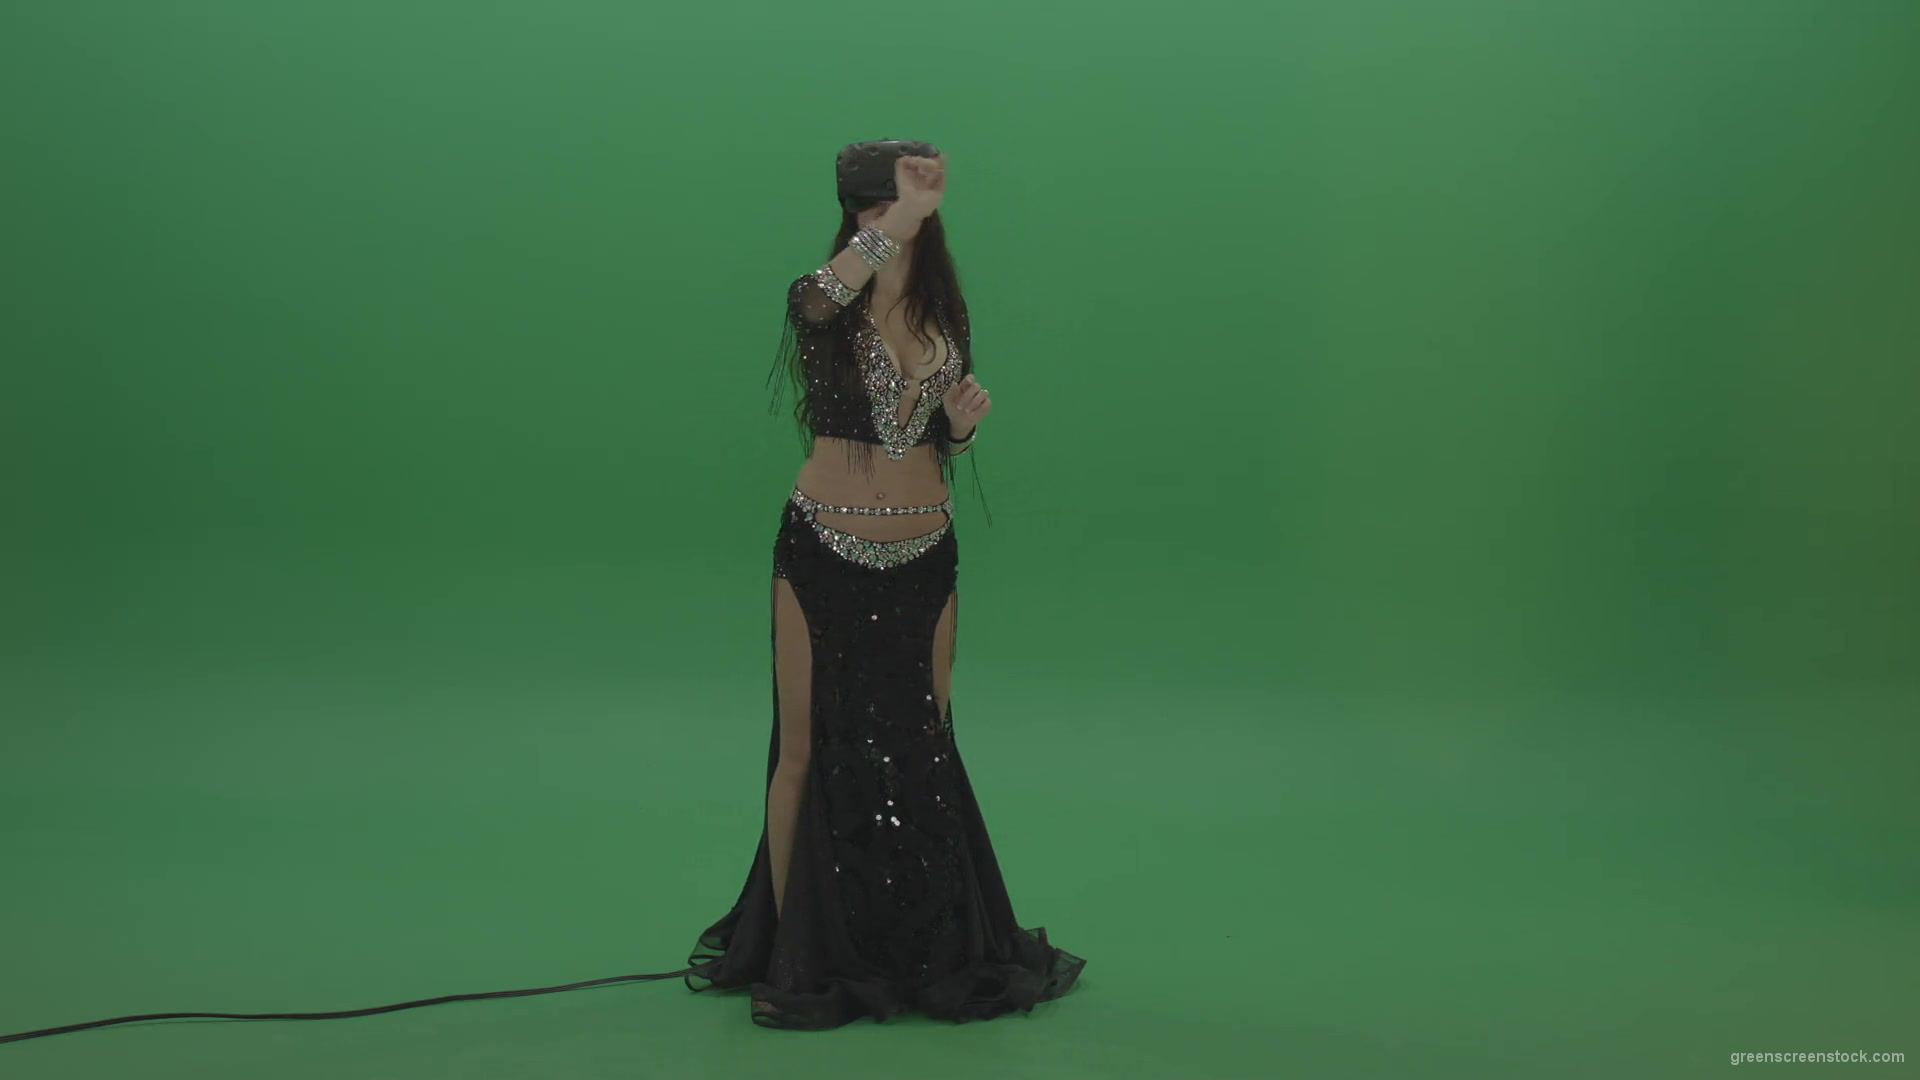 Beautiful-belly-dancer-in-VR-headset-operates-invisible-screen-over-green-screen-background-1920_008 Green Screen Stock